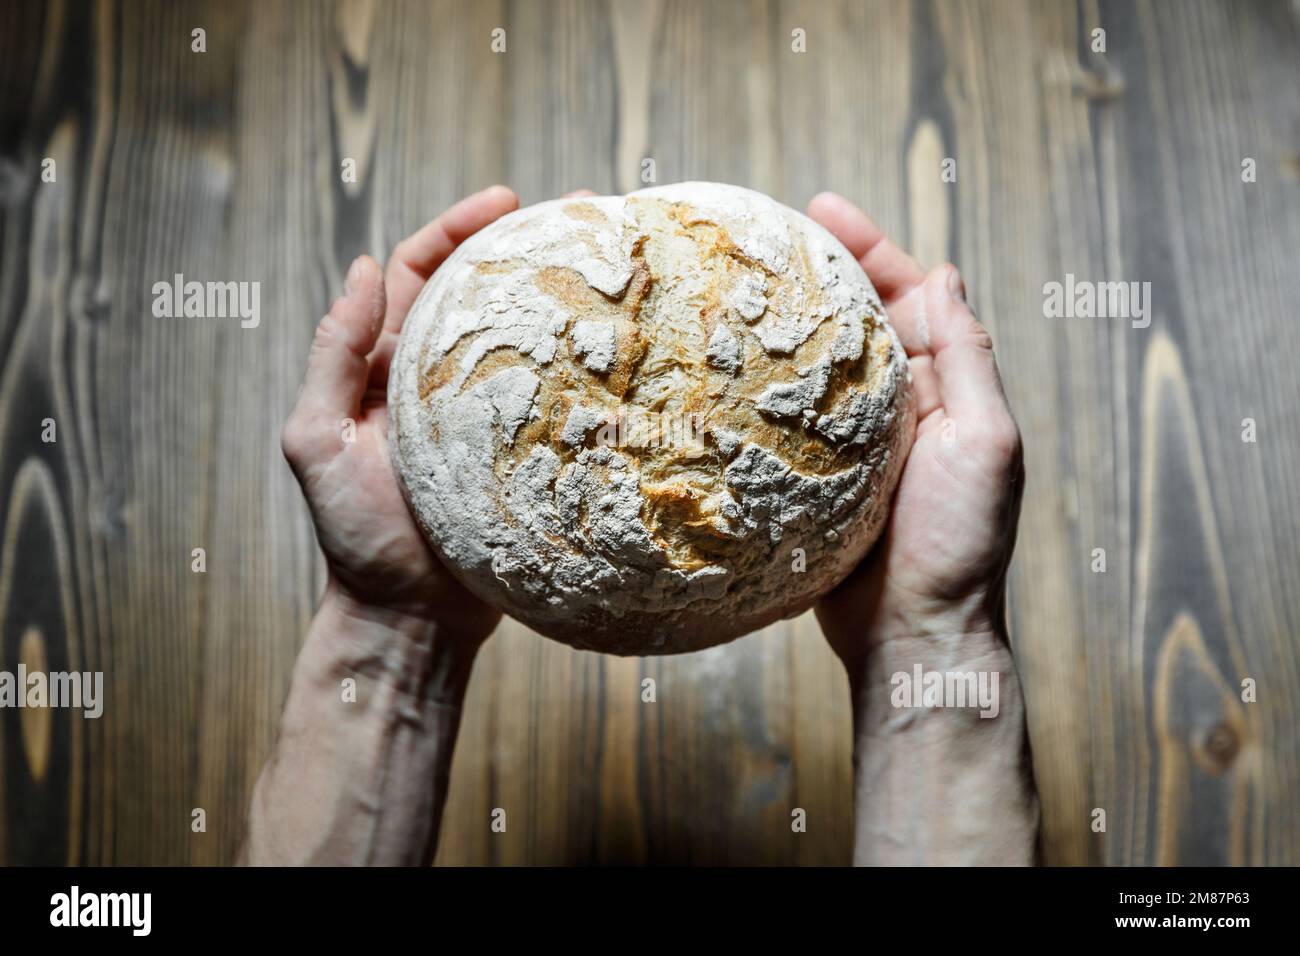 Male hands holding fresh baked bread loaf over wood background. Food provision concept. Agriculrural production Stock Photo